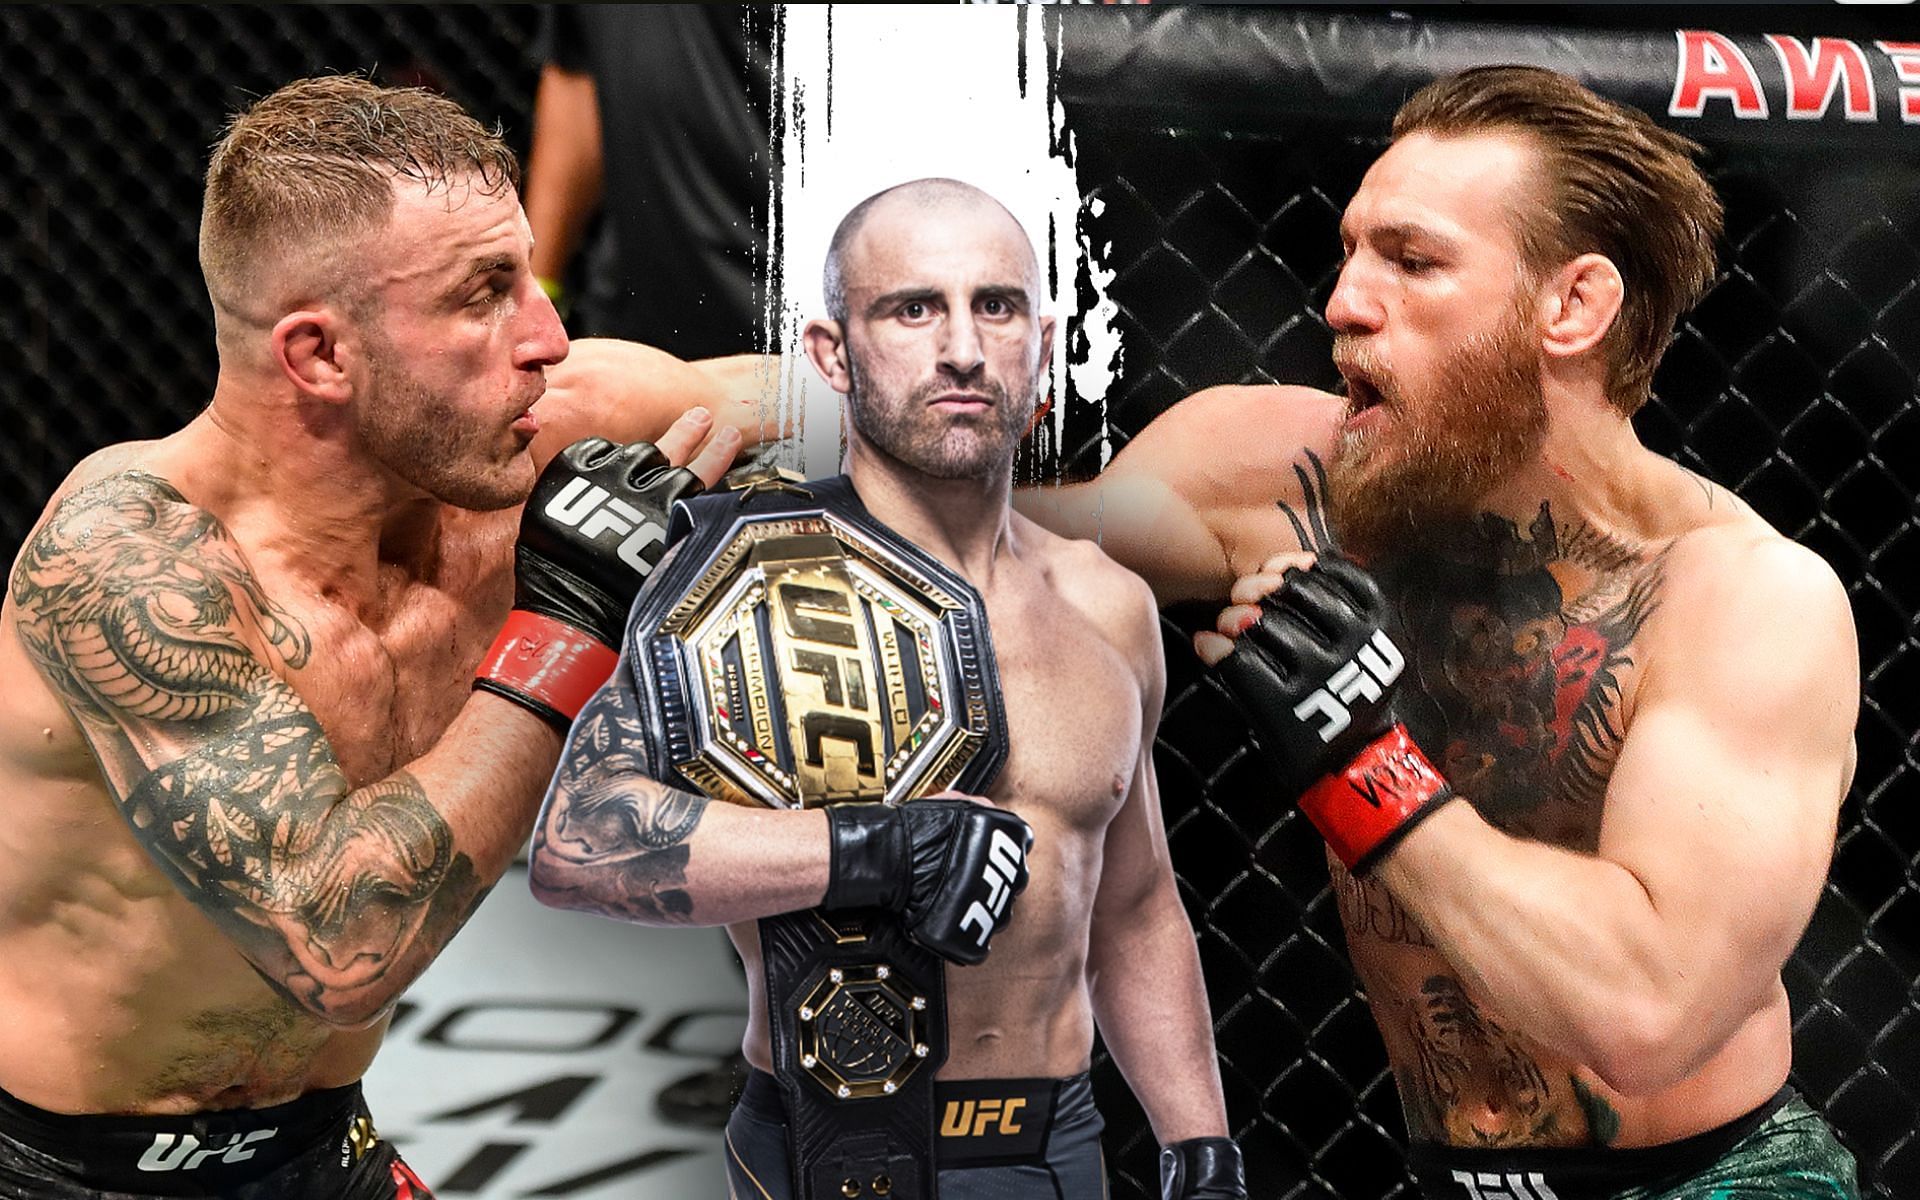 Alexander Volkanovski is eyeing a super fight with Conor McGregor [Center Image credit - ufc.com; other images - Getty]